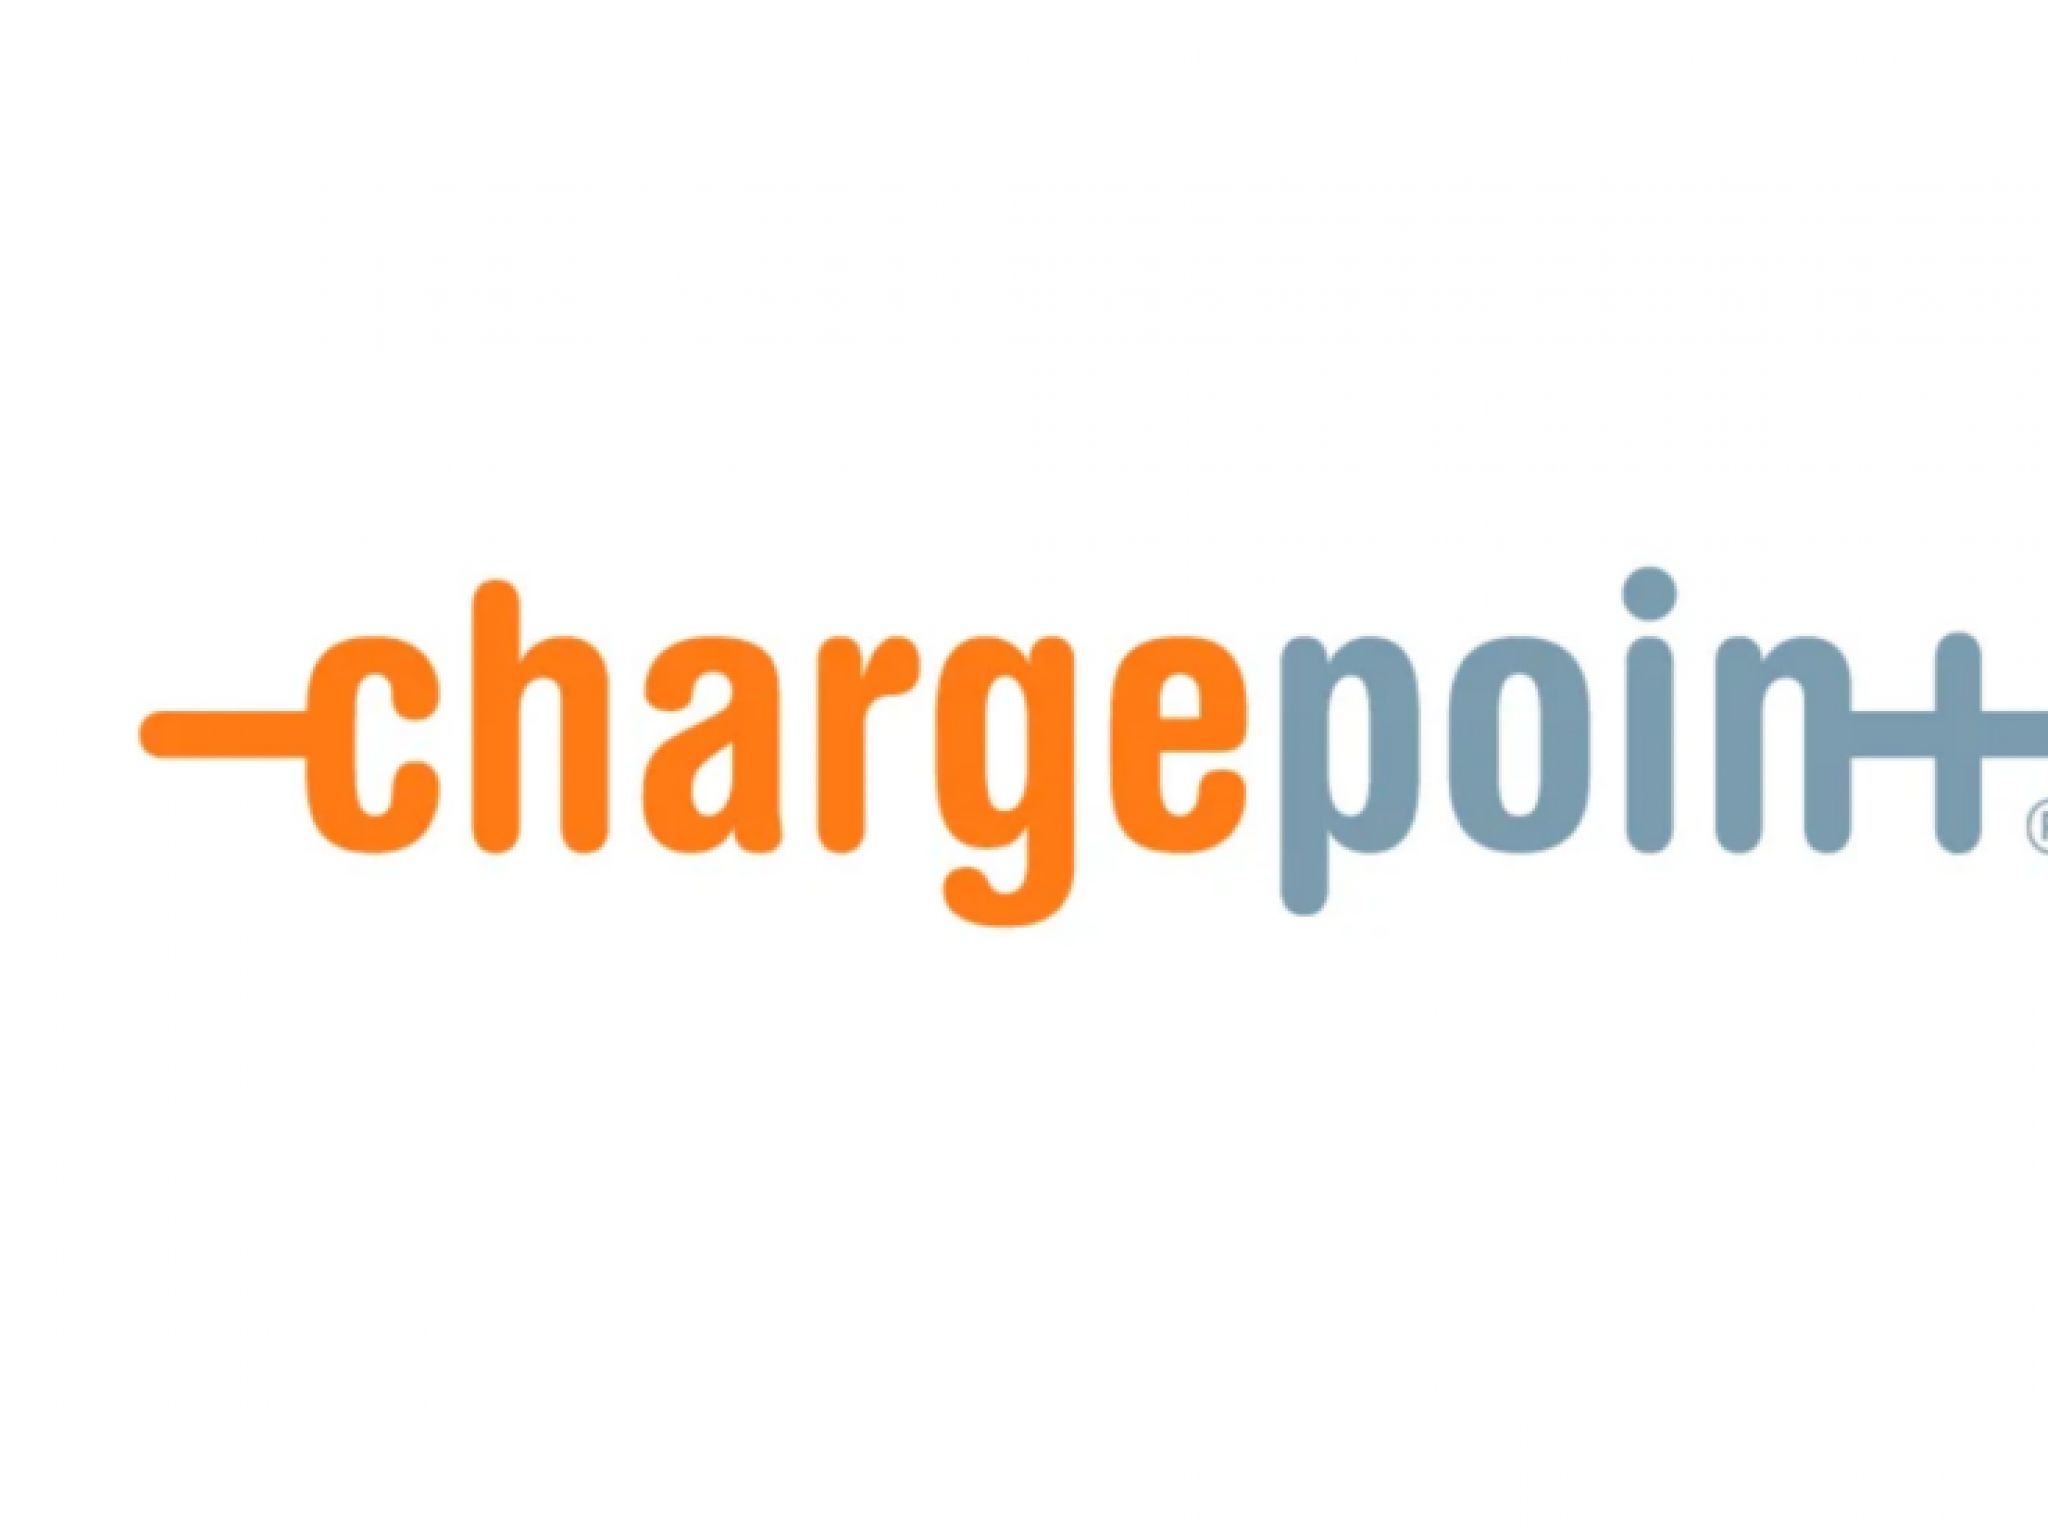  whats-going-on-with-chargepoint-shares-wednesday 